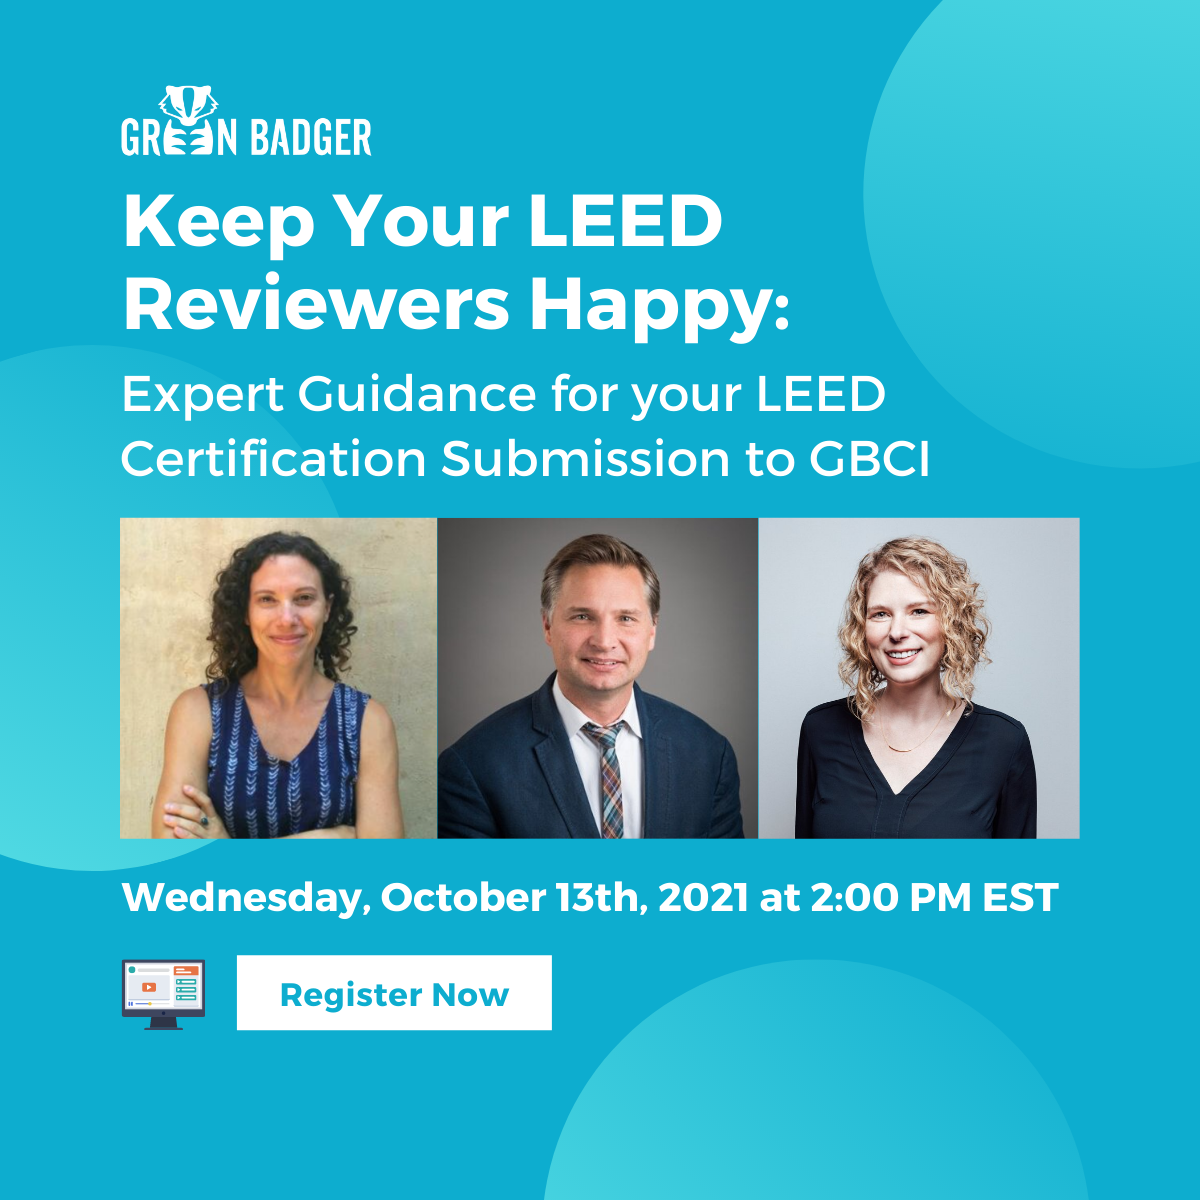 Keep Your LEED Reviewers Happy: Expert Guidance for Your LEED Certification Submission to GBCI